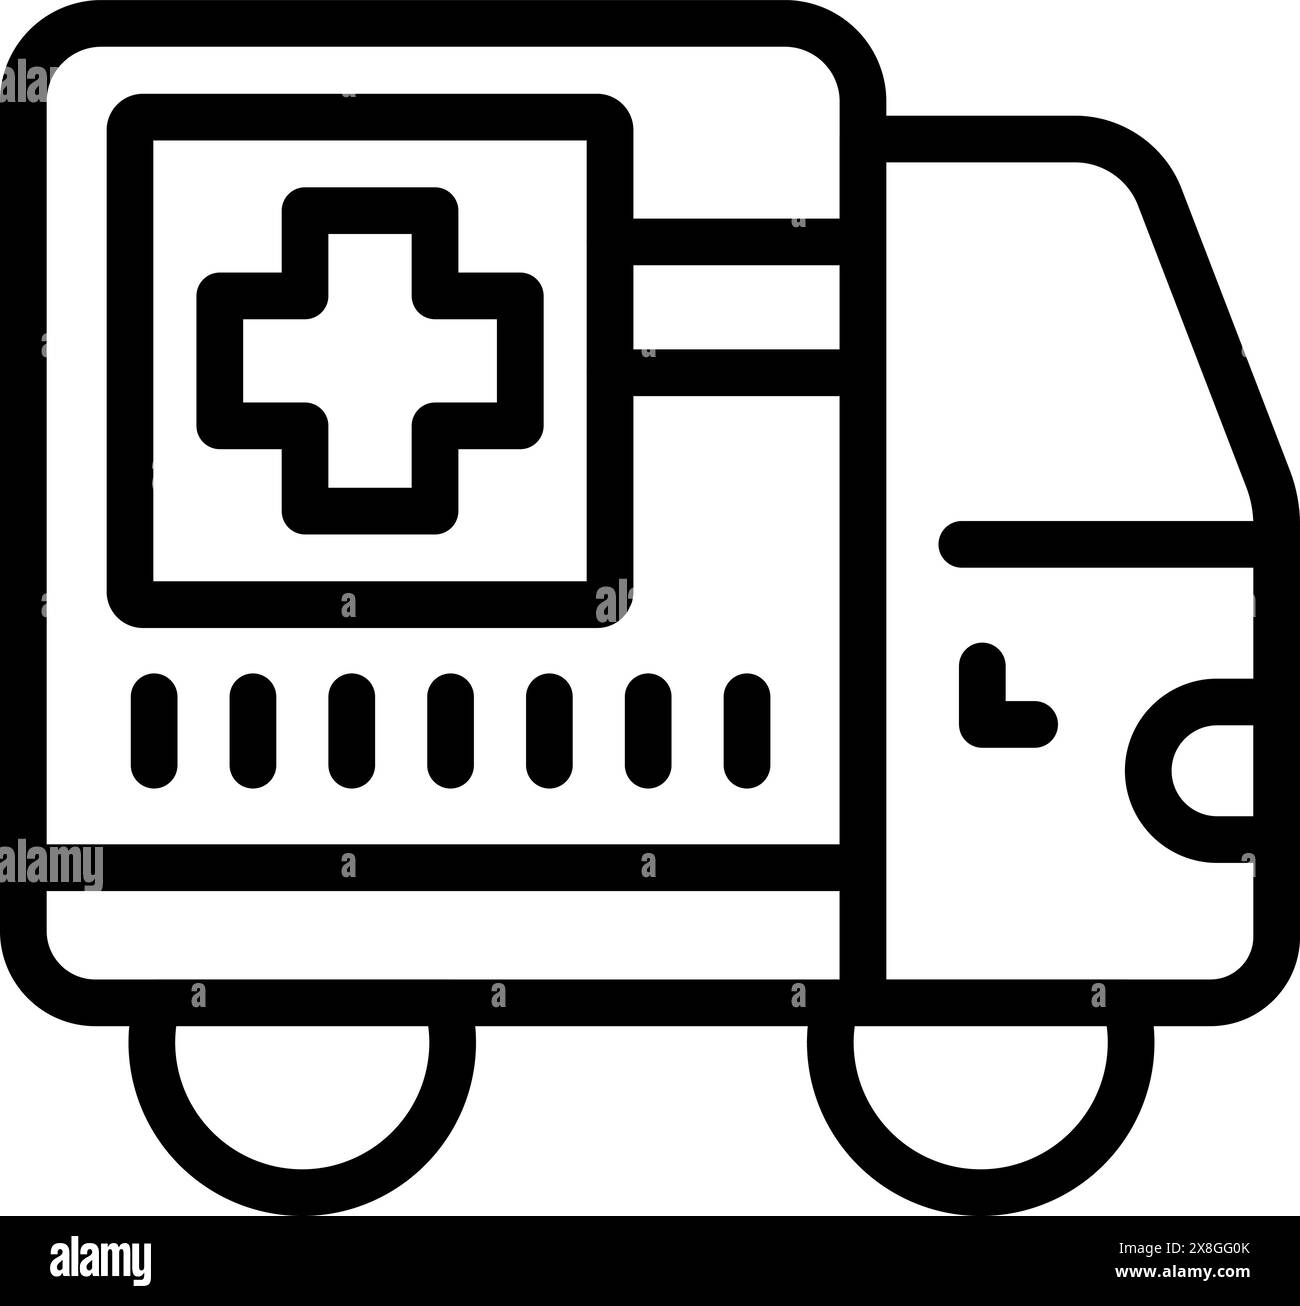 Simple line art vector illustration of an ambulance, ideal for medical and emergency services Stock Vector